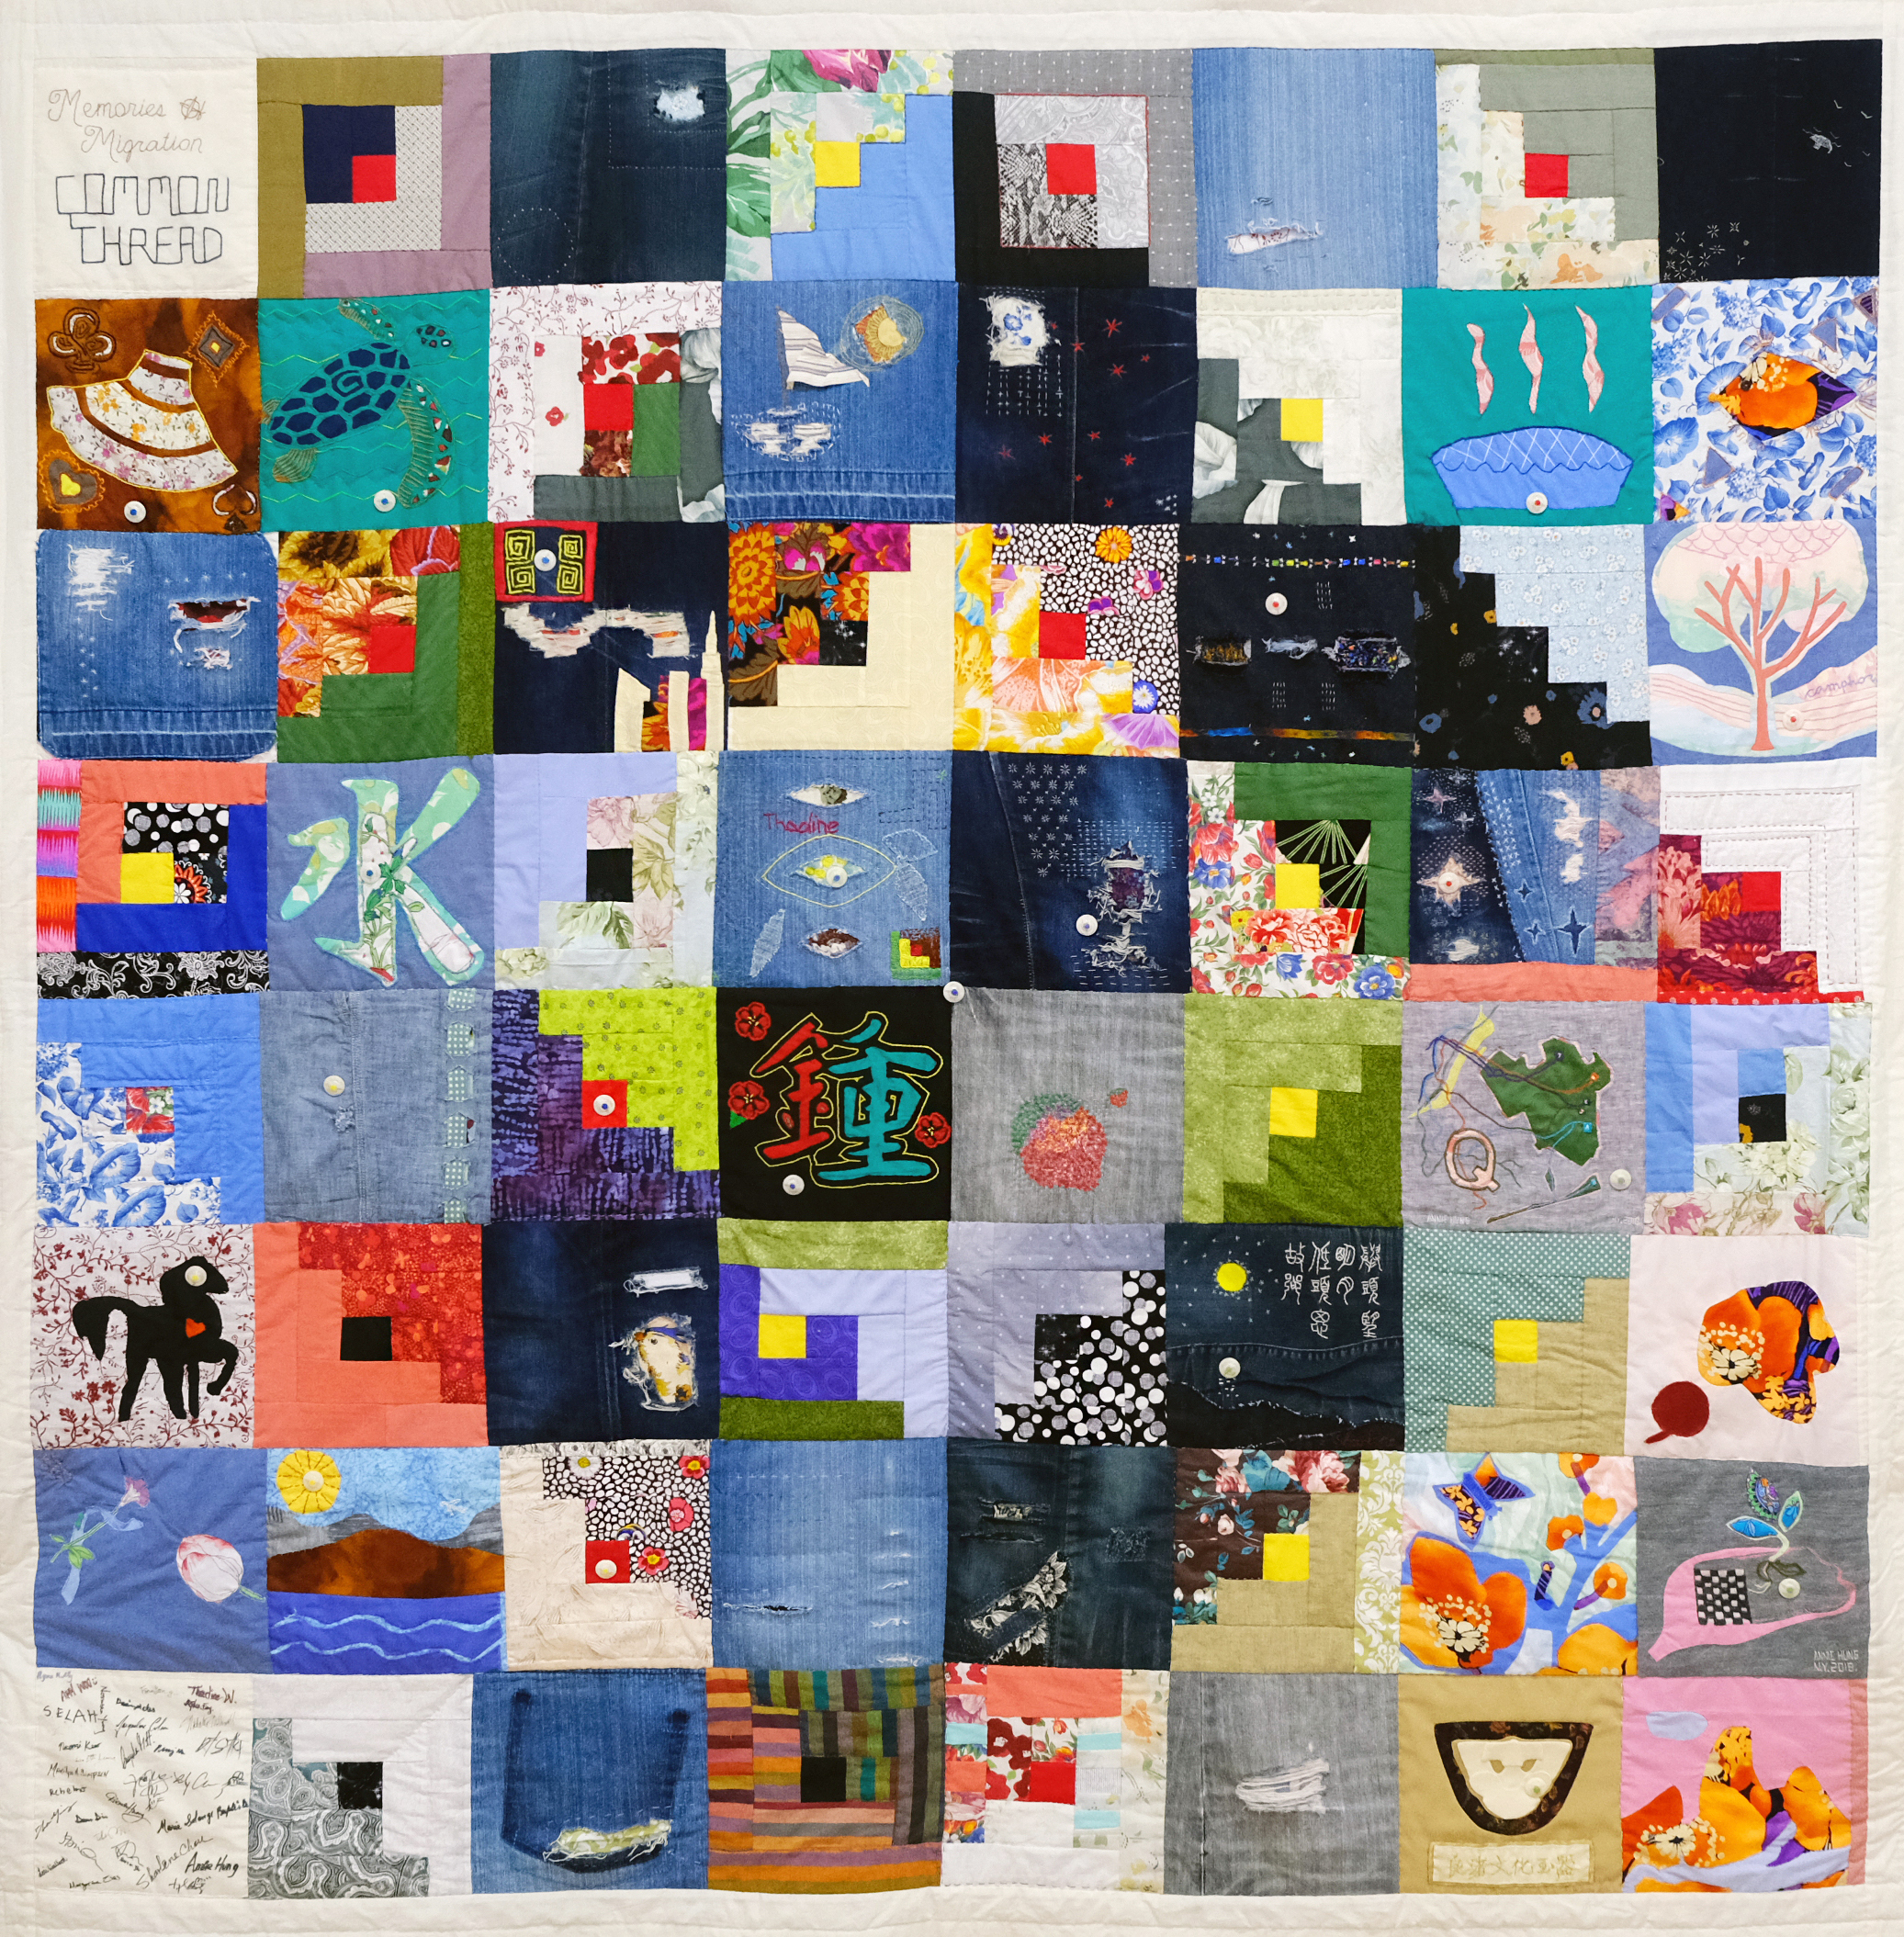 A square quilt made up of 64 smaller squares patches and a thin white perimeter. The first square, on the top left, has the words “Memories Migration Common Thread” embroidered on a white patch with black thread. Each of the other patches are made up of different colors with either abstract shapes, letters, or motifs.